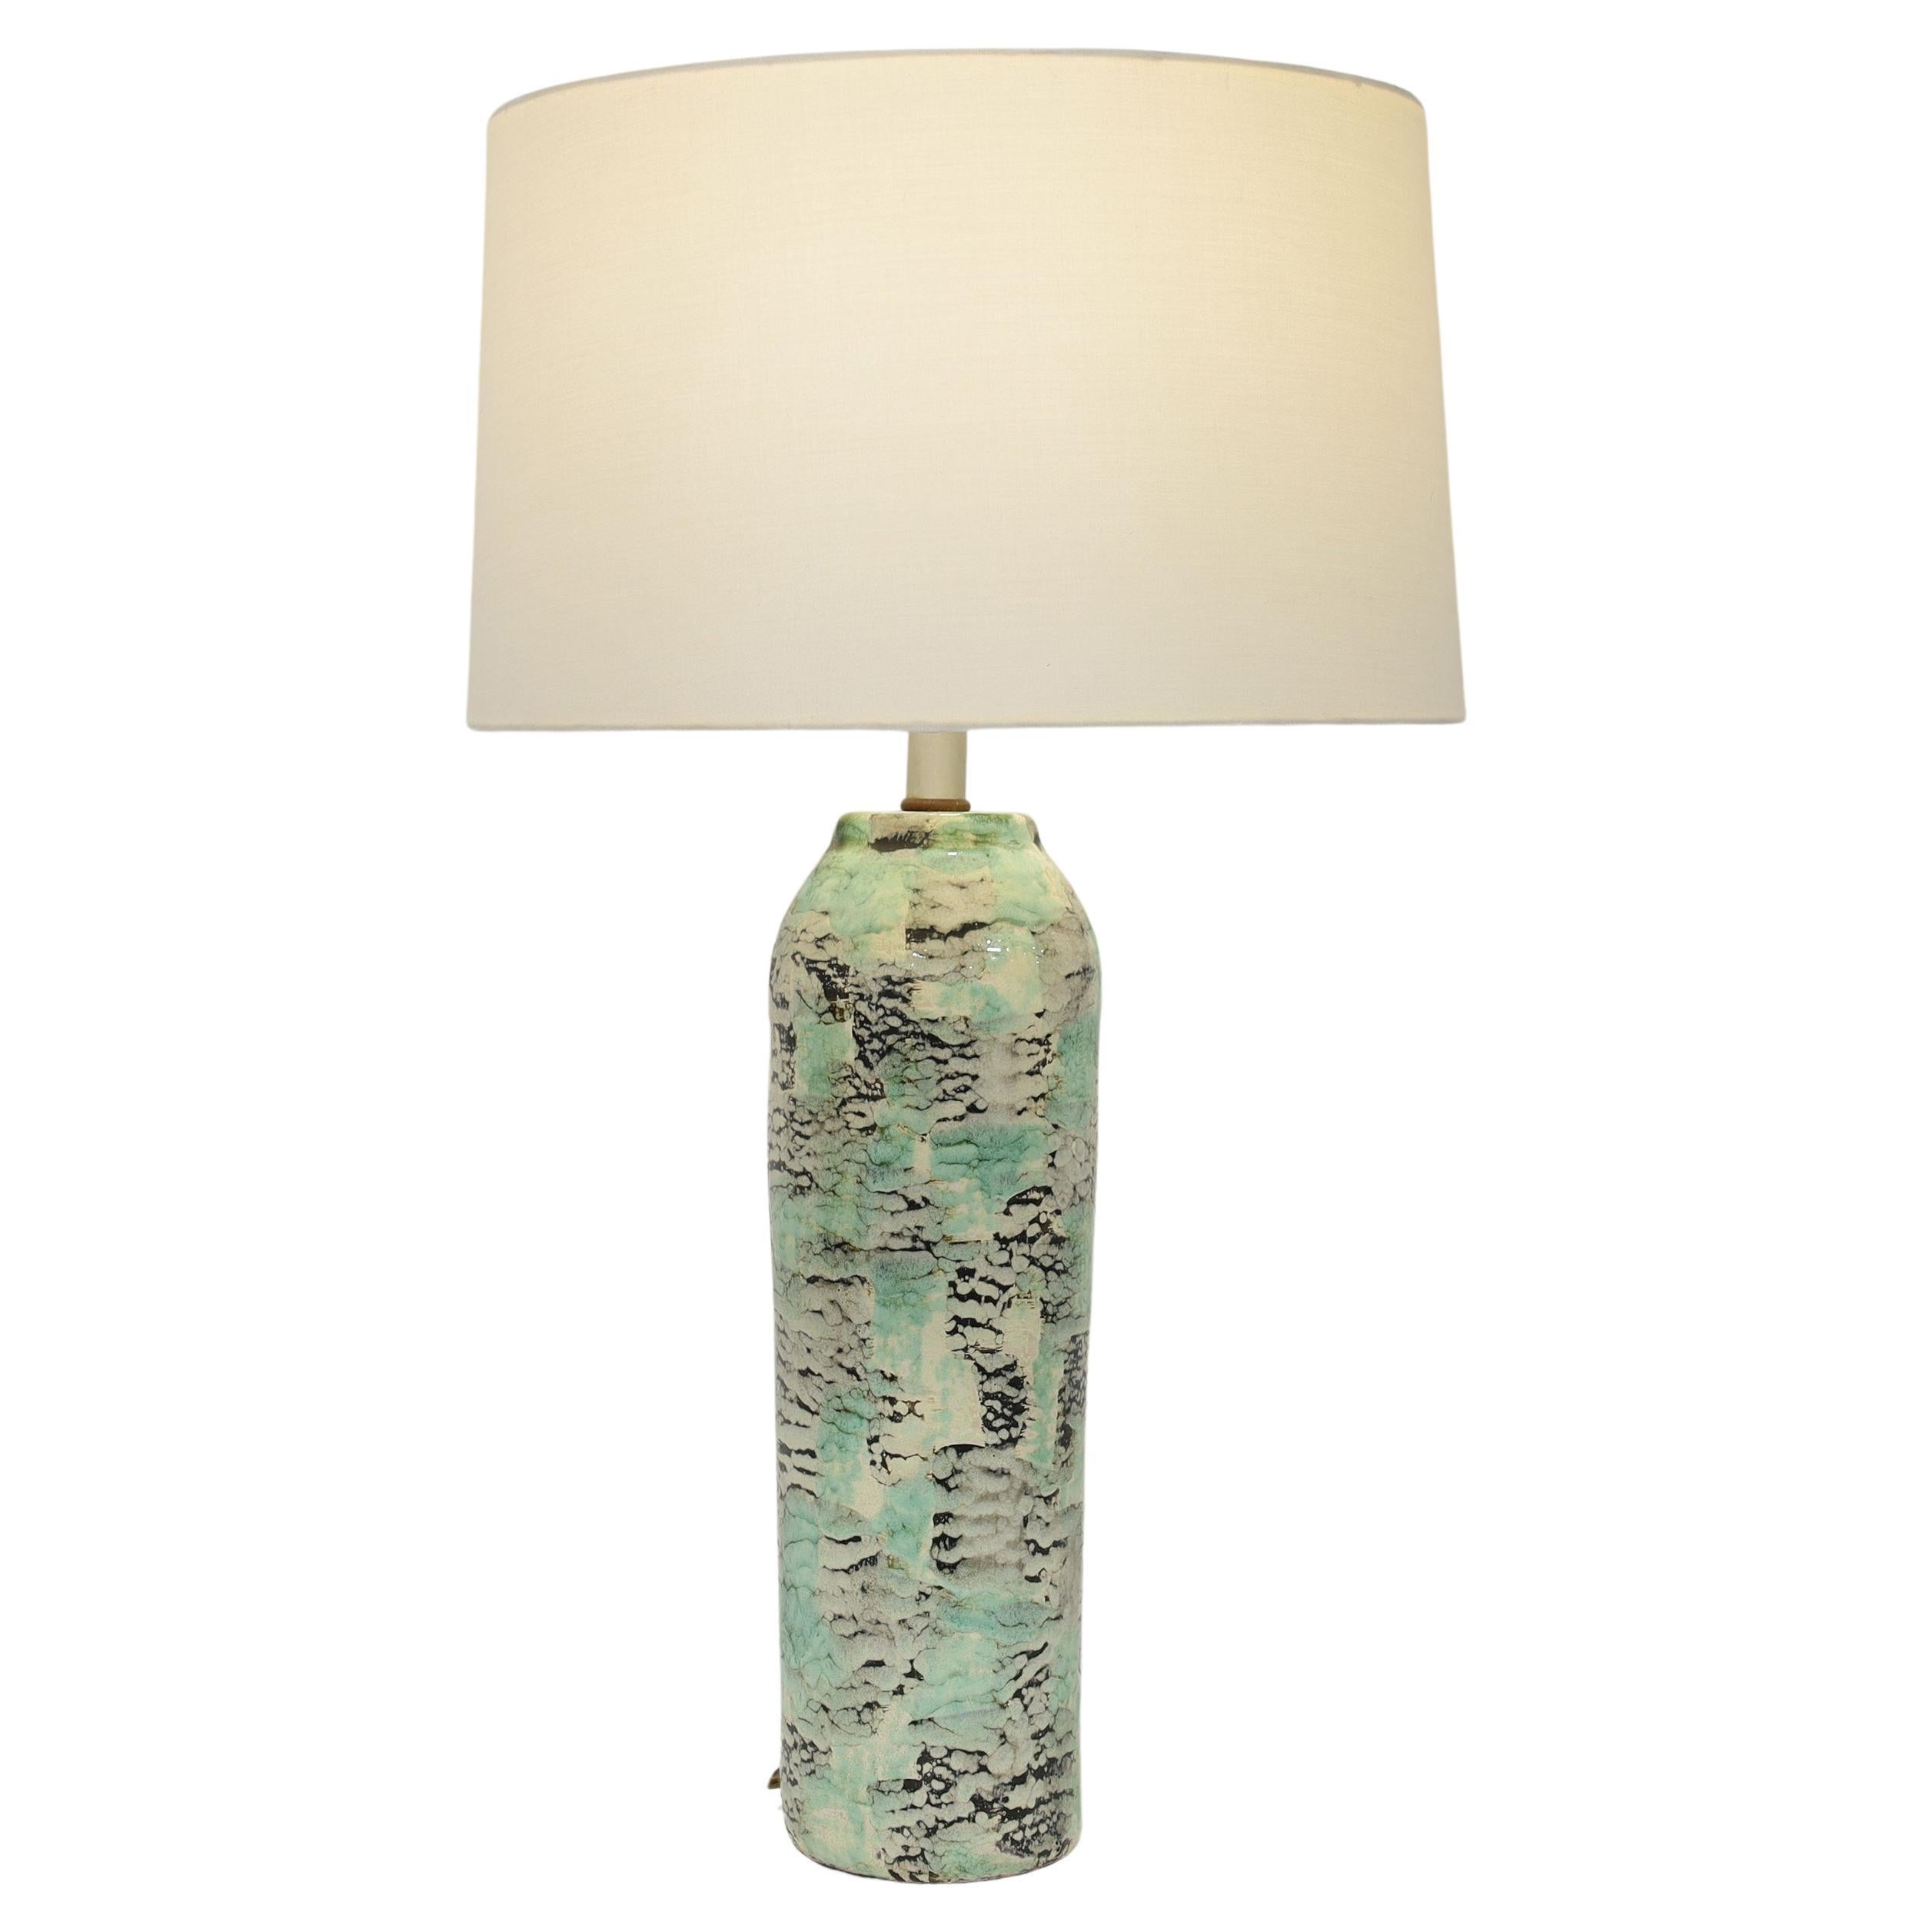 Kelby Ceramic Table Lamp in Black, Green and Off-White Abstract Pattern